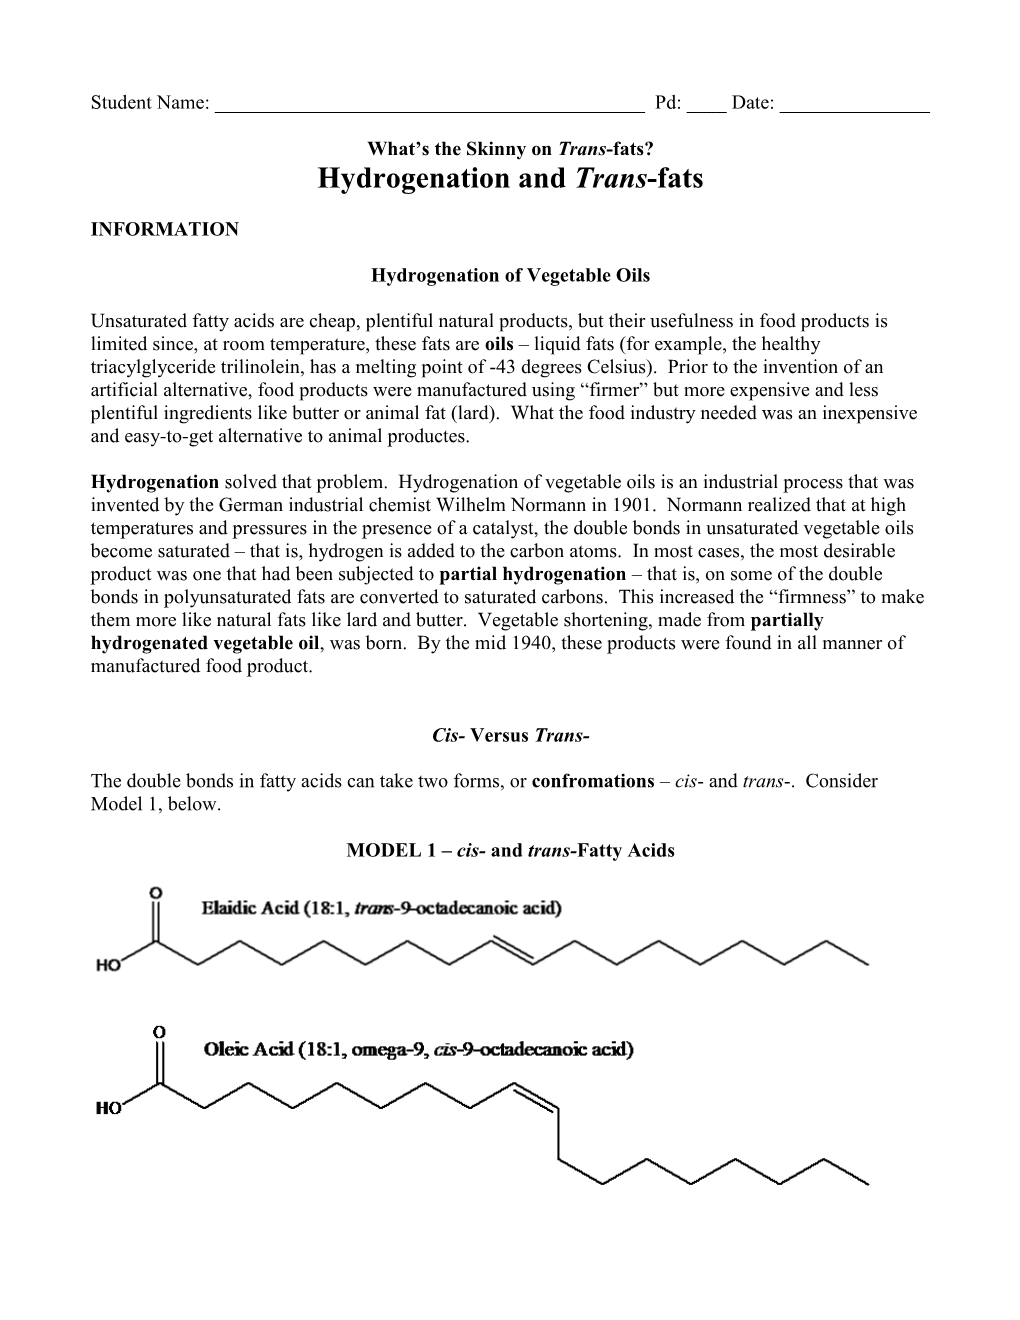 Hydrogenation and Trans-Fats